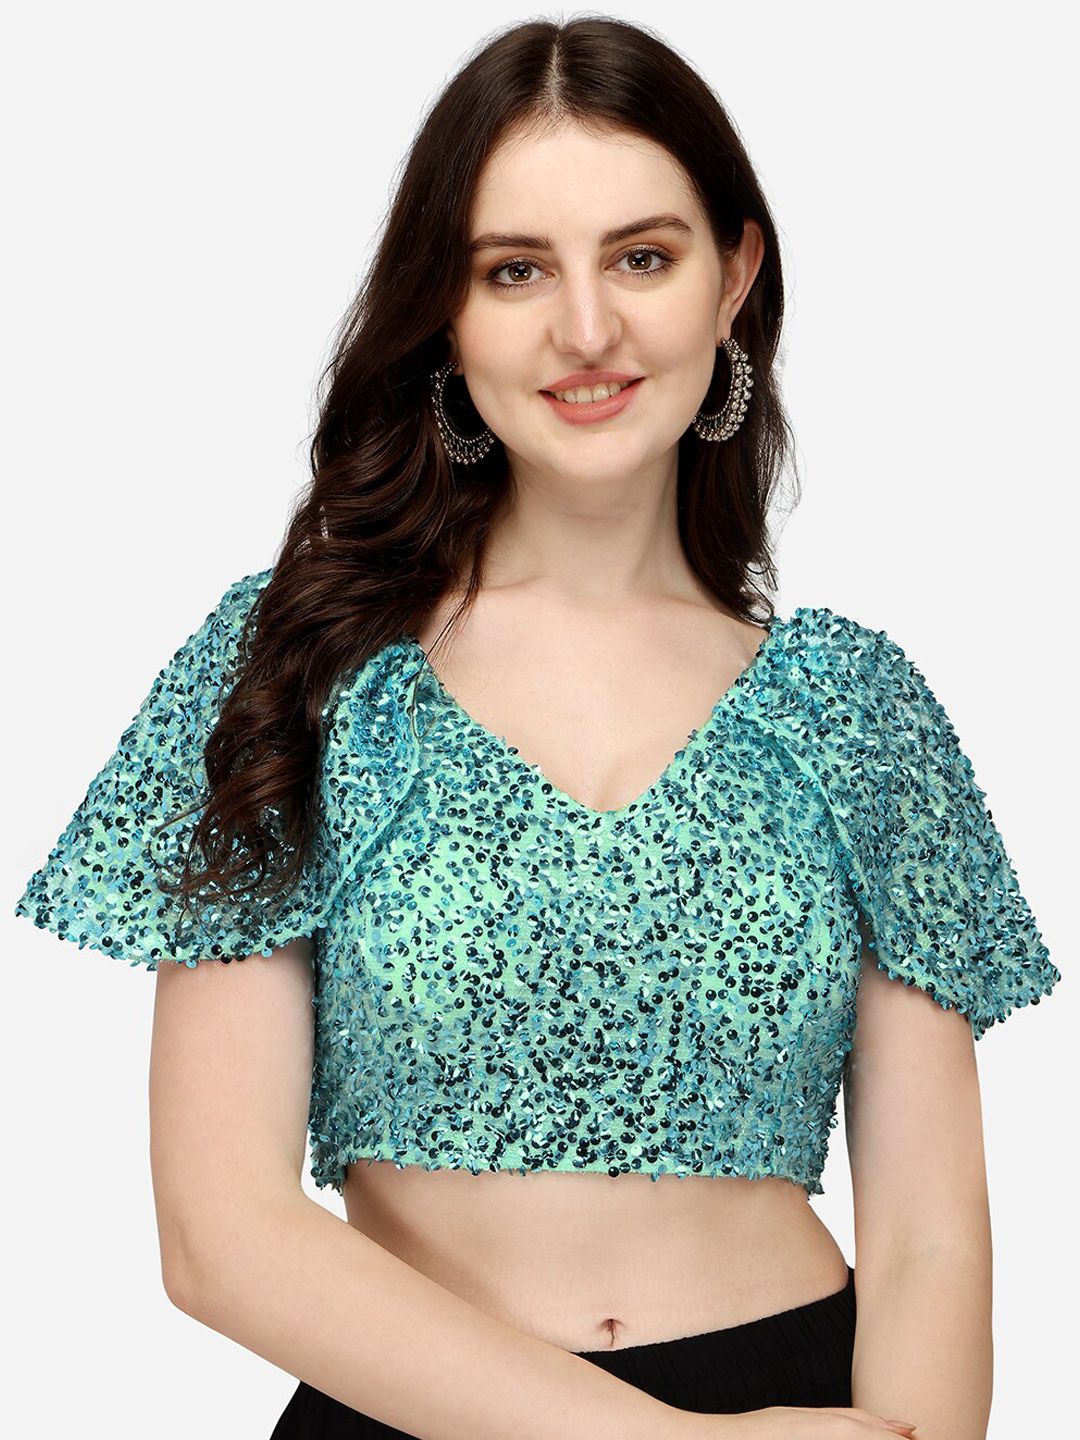 Sumaira Tex Turquoise Blue Sequinned Saree Blouse Price in India